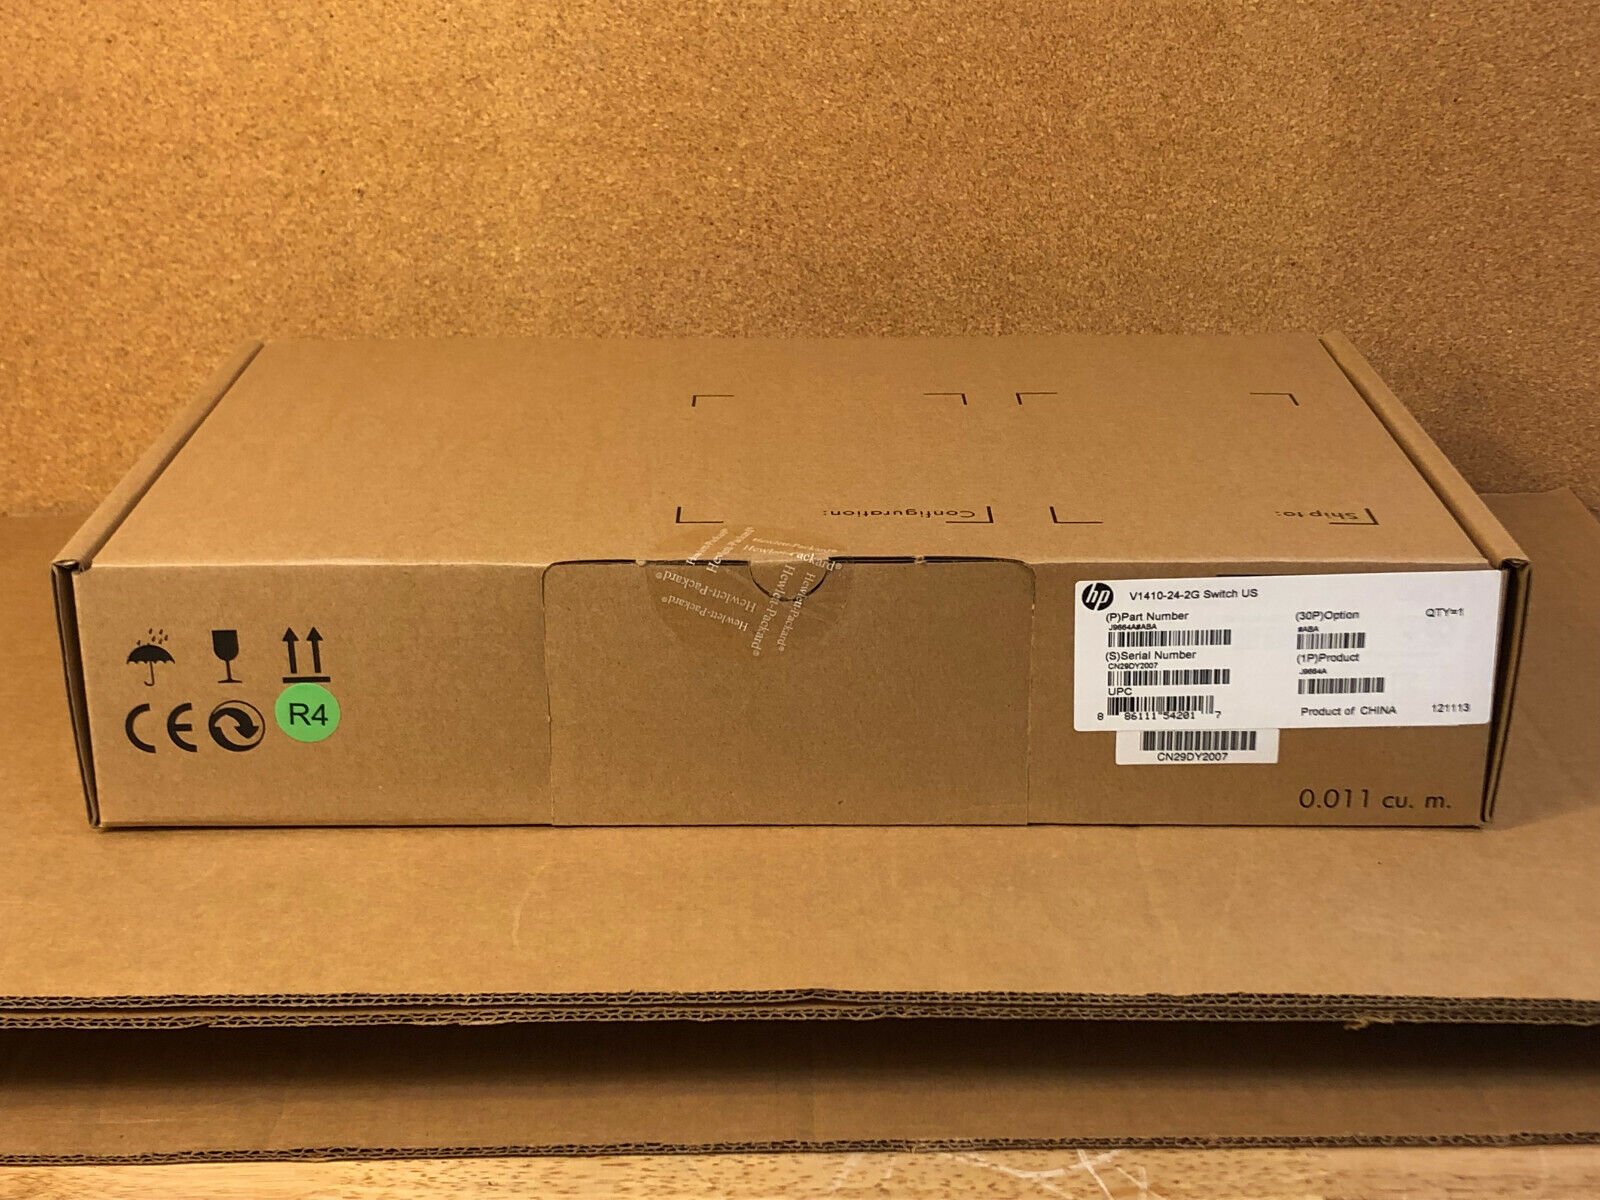 HPE J9664A OfficeConnect 1410 Series Unmanaged Ethernet Switch 24x 10/100 ports 2x port.